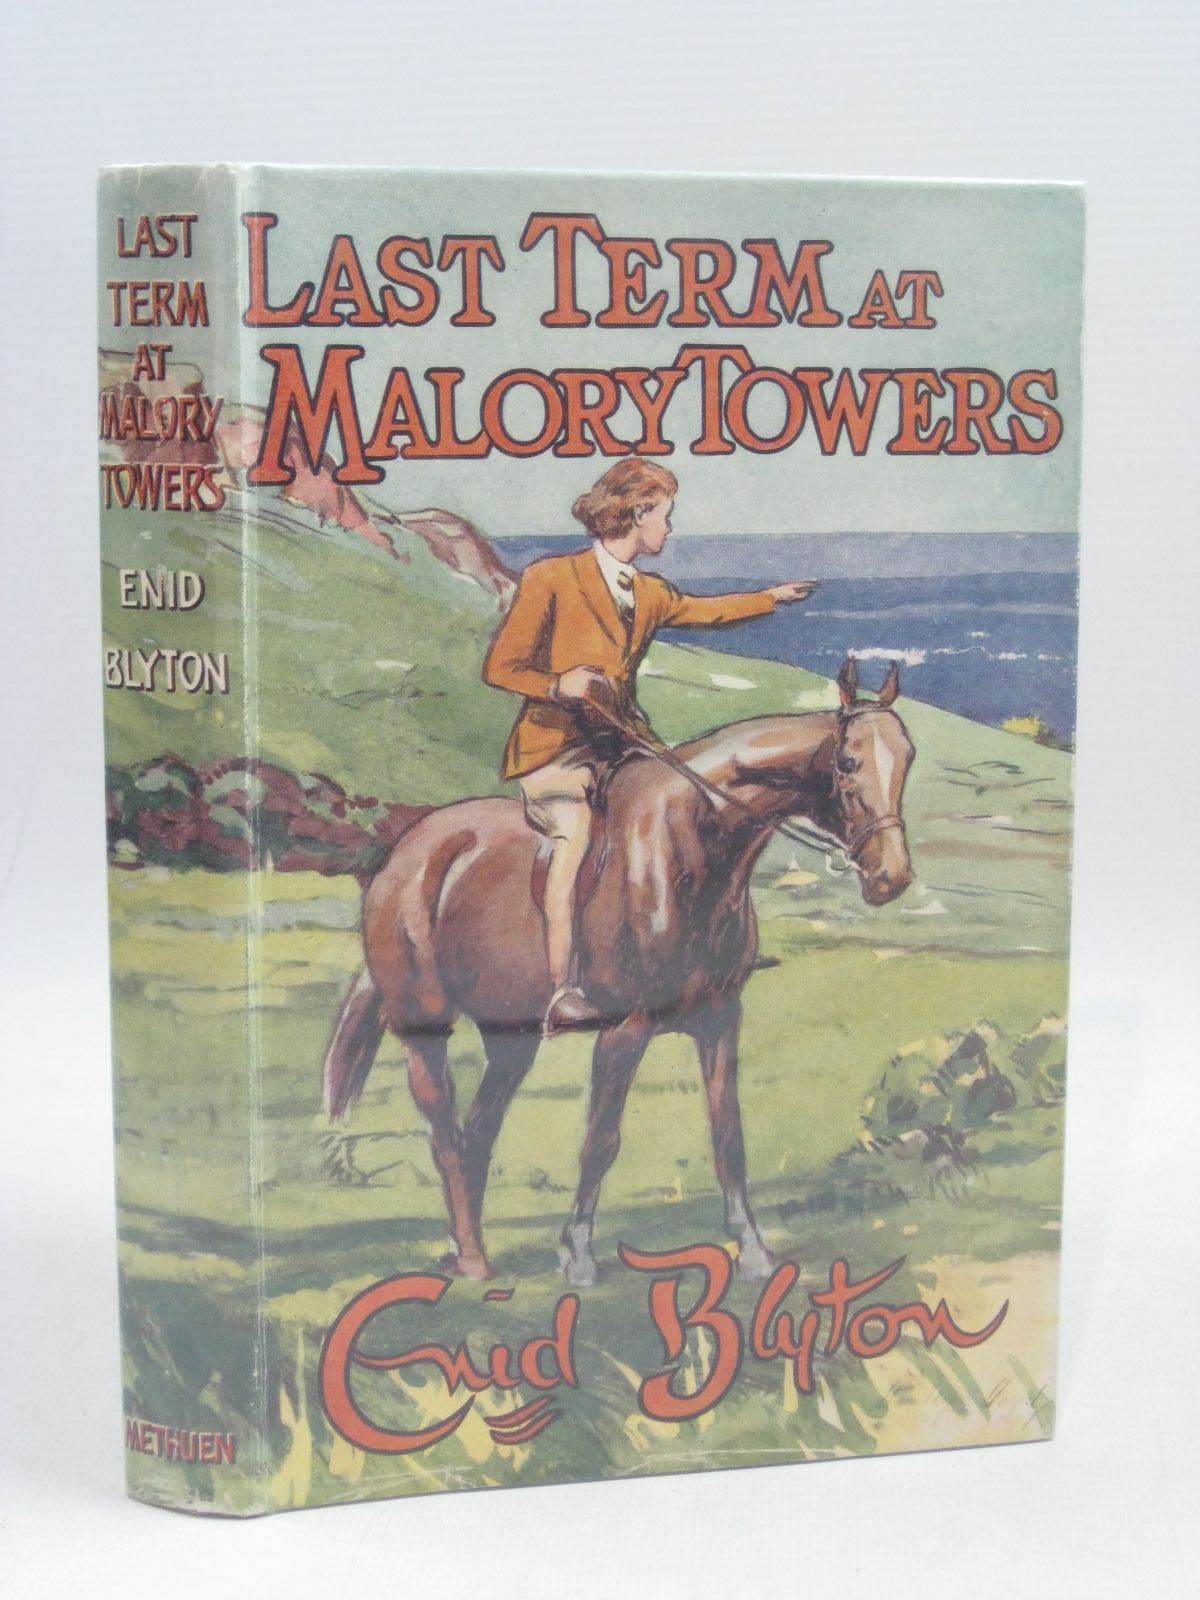 Cover of LAST TERM AT MALORY TOWERS by Enid Blyton